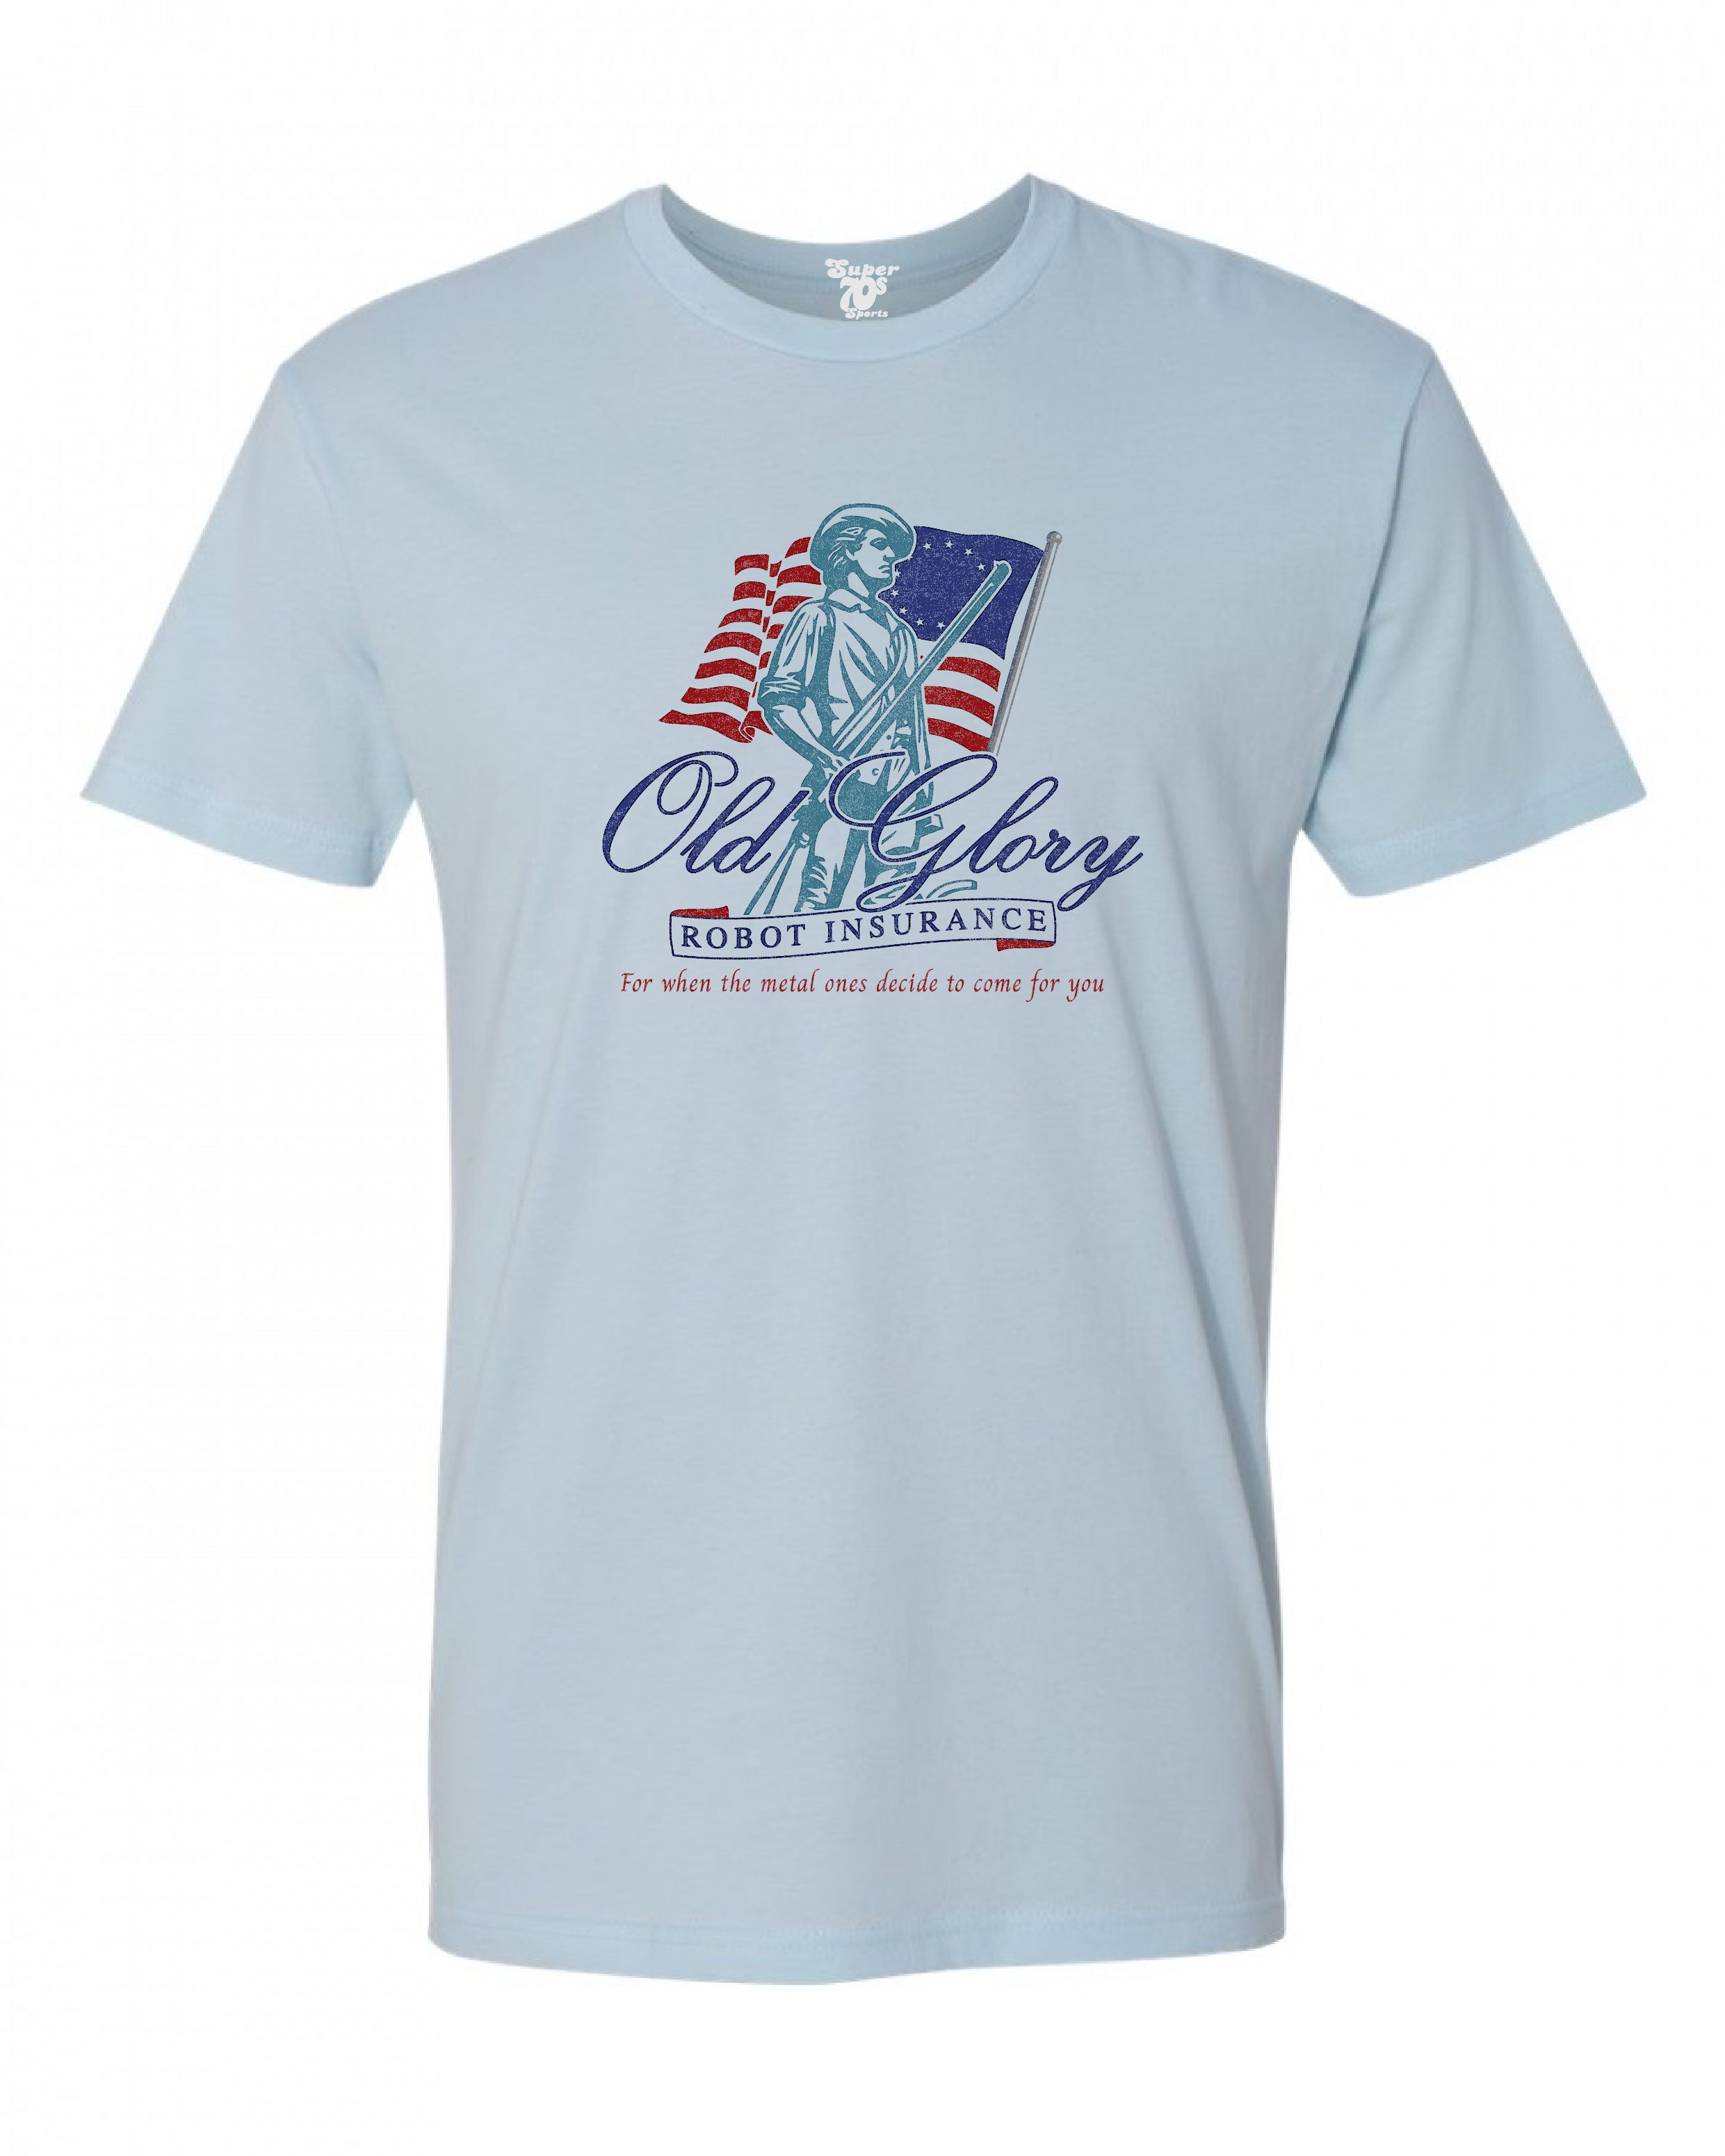 Old Glory Robot Insurance Tee – Super 70s Sports